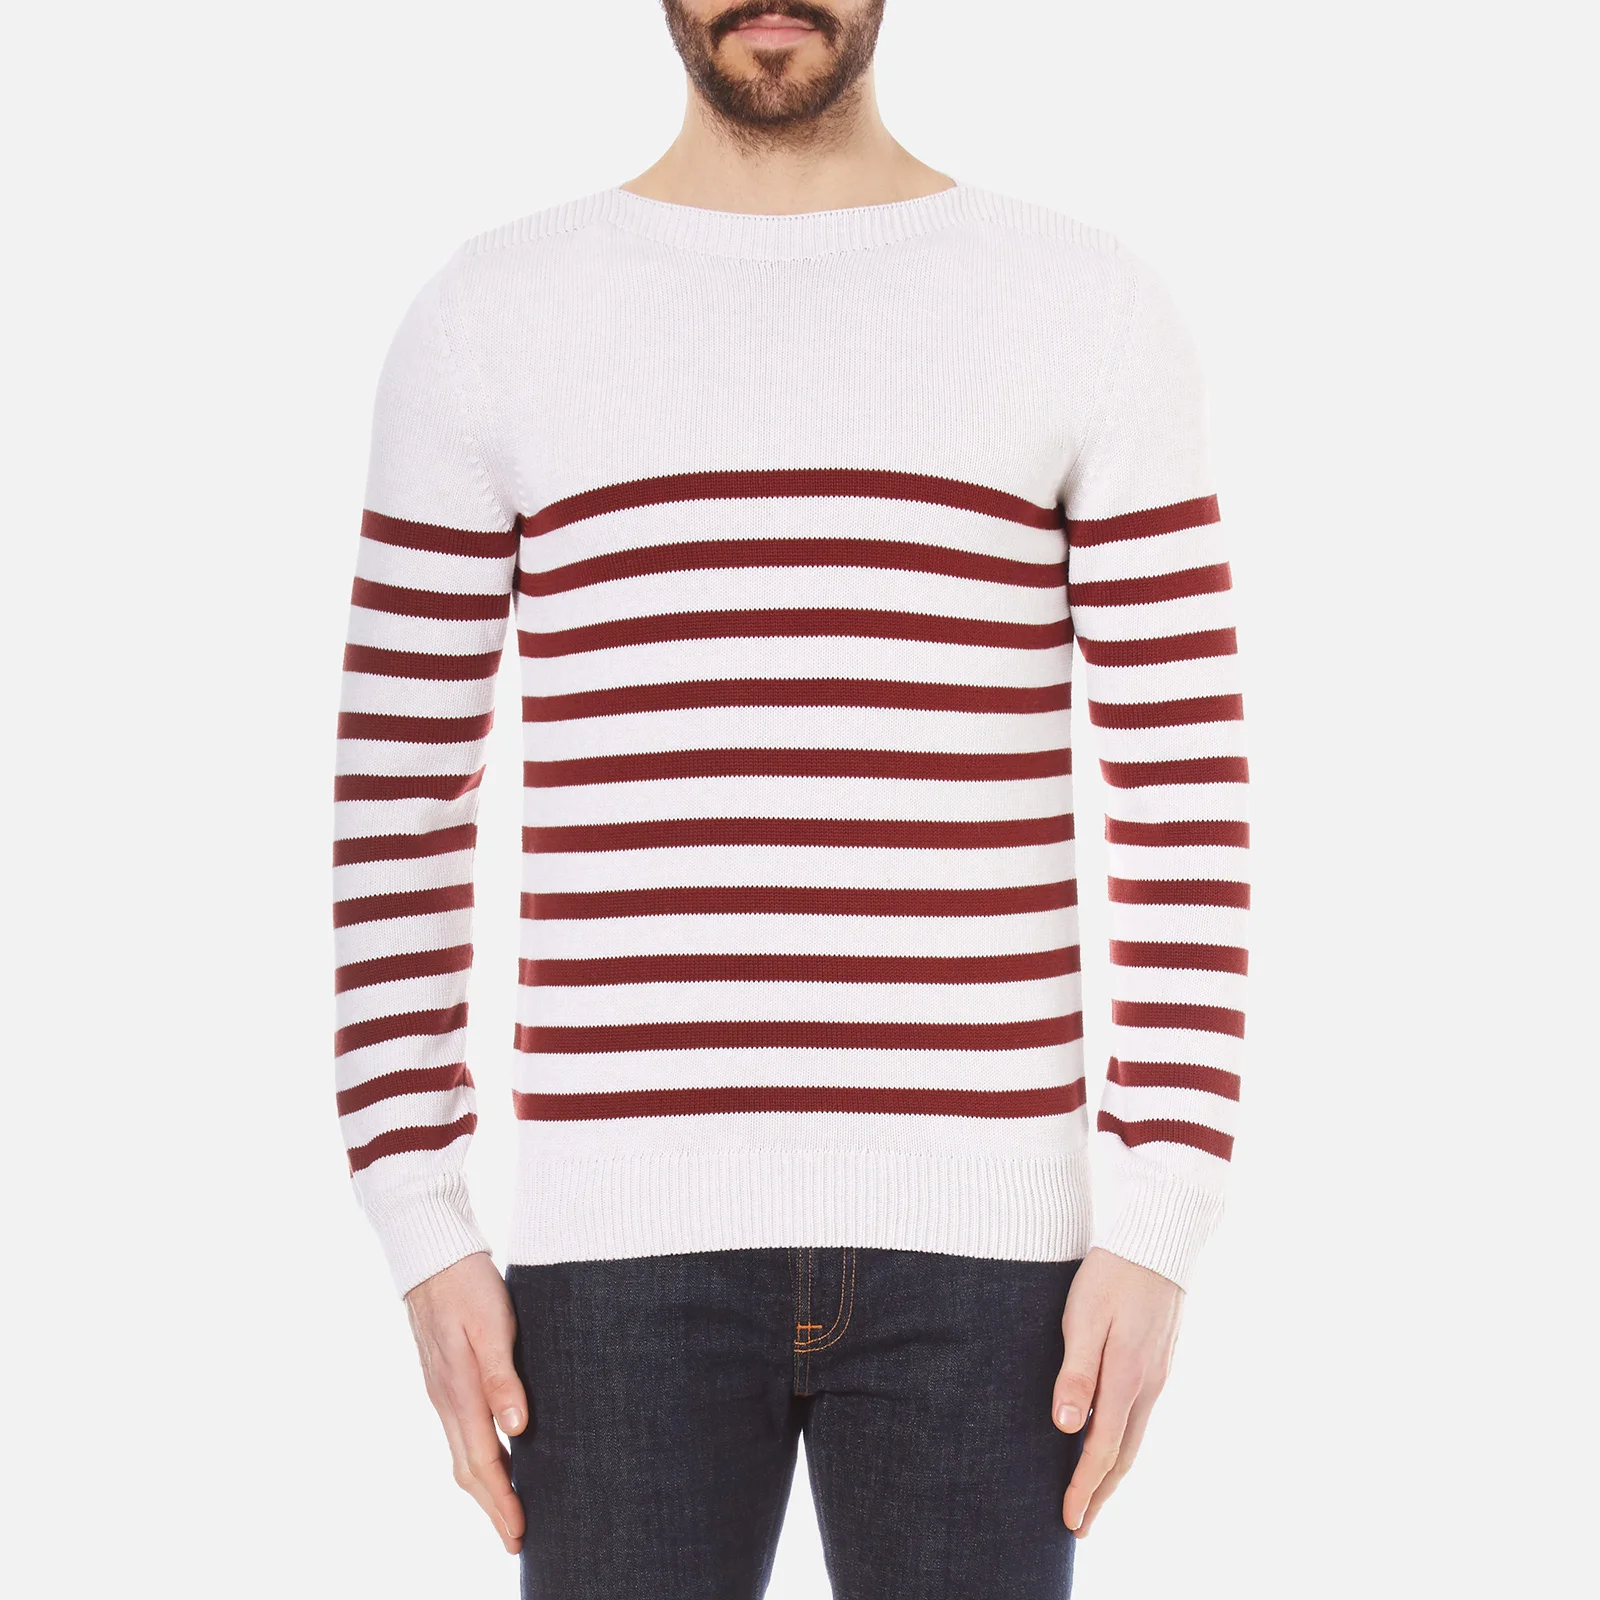 A.P.C. Men's Pull Lord Stripe Knitted Jumper - Blanc Casse Image 1